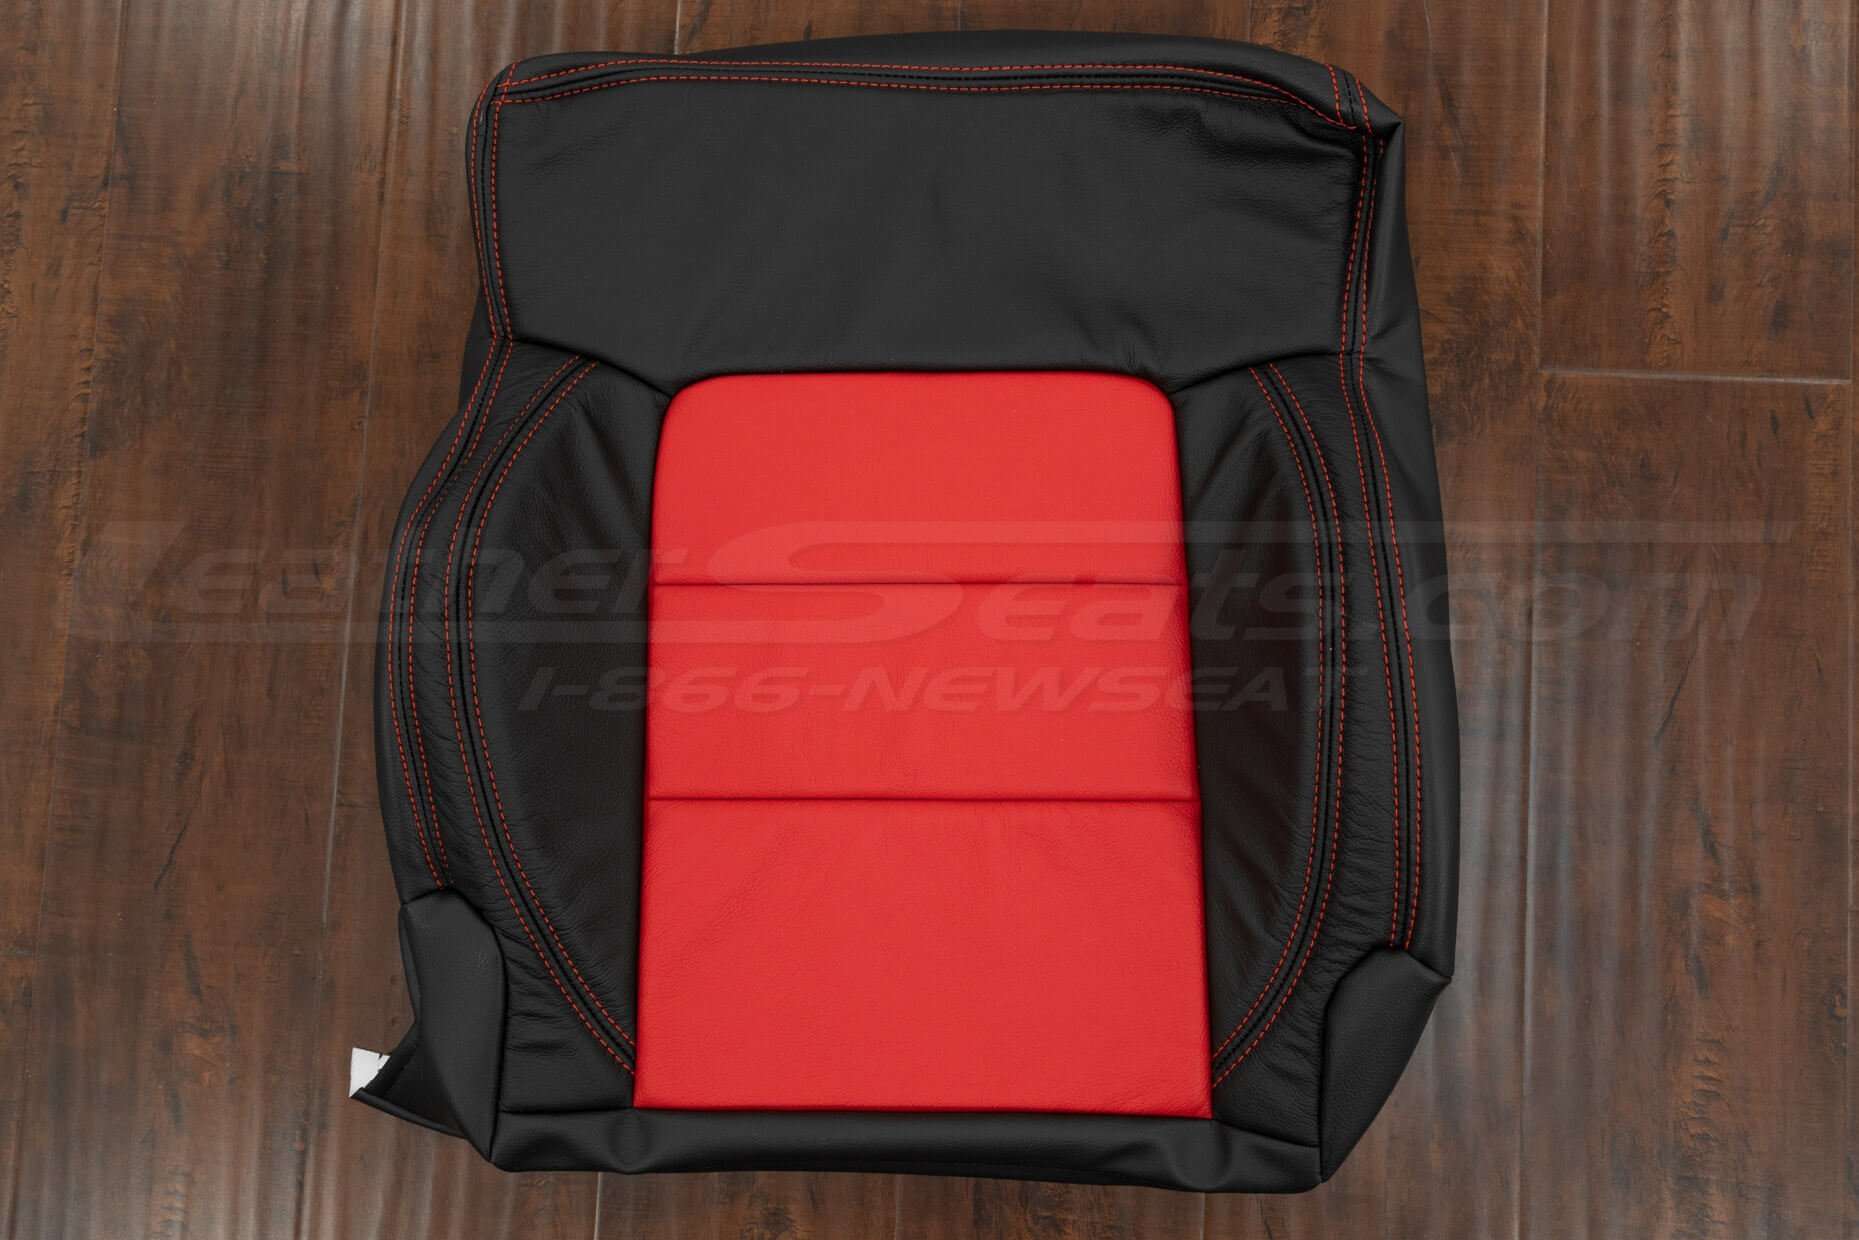 Mitsubishi Eclipse Two-Tone front backrest upholstery in Black and Bright Red